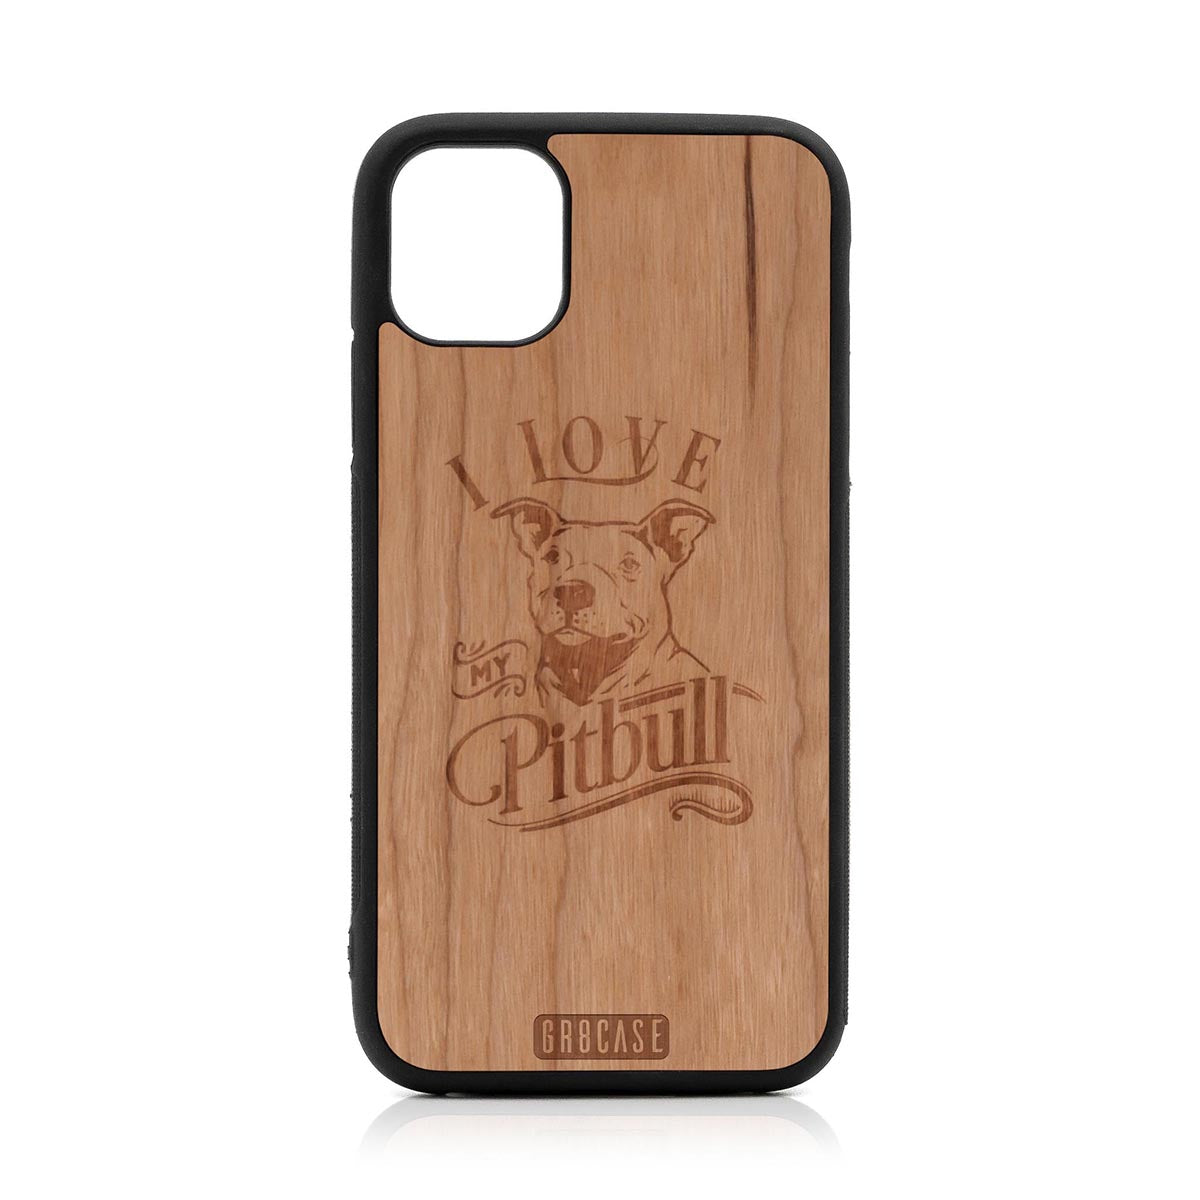 I Love My Pitbull Design Wood Case For iPhone 11 by GR8CASE